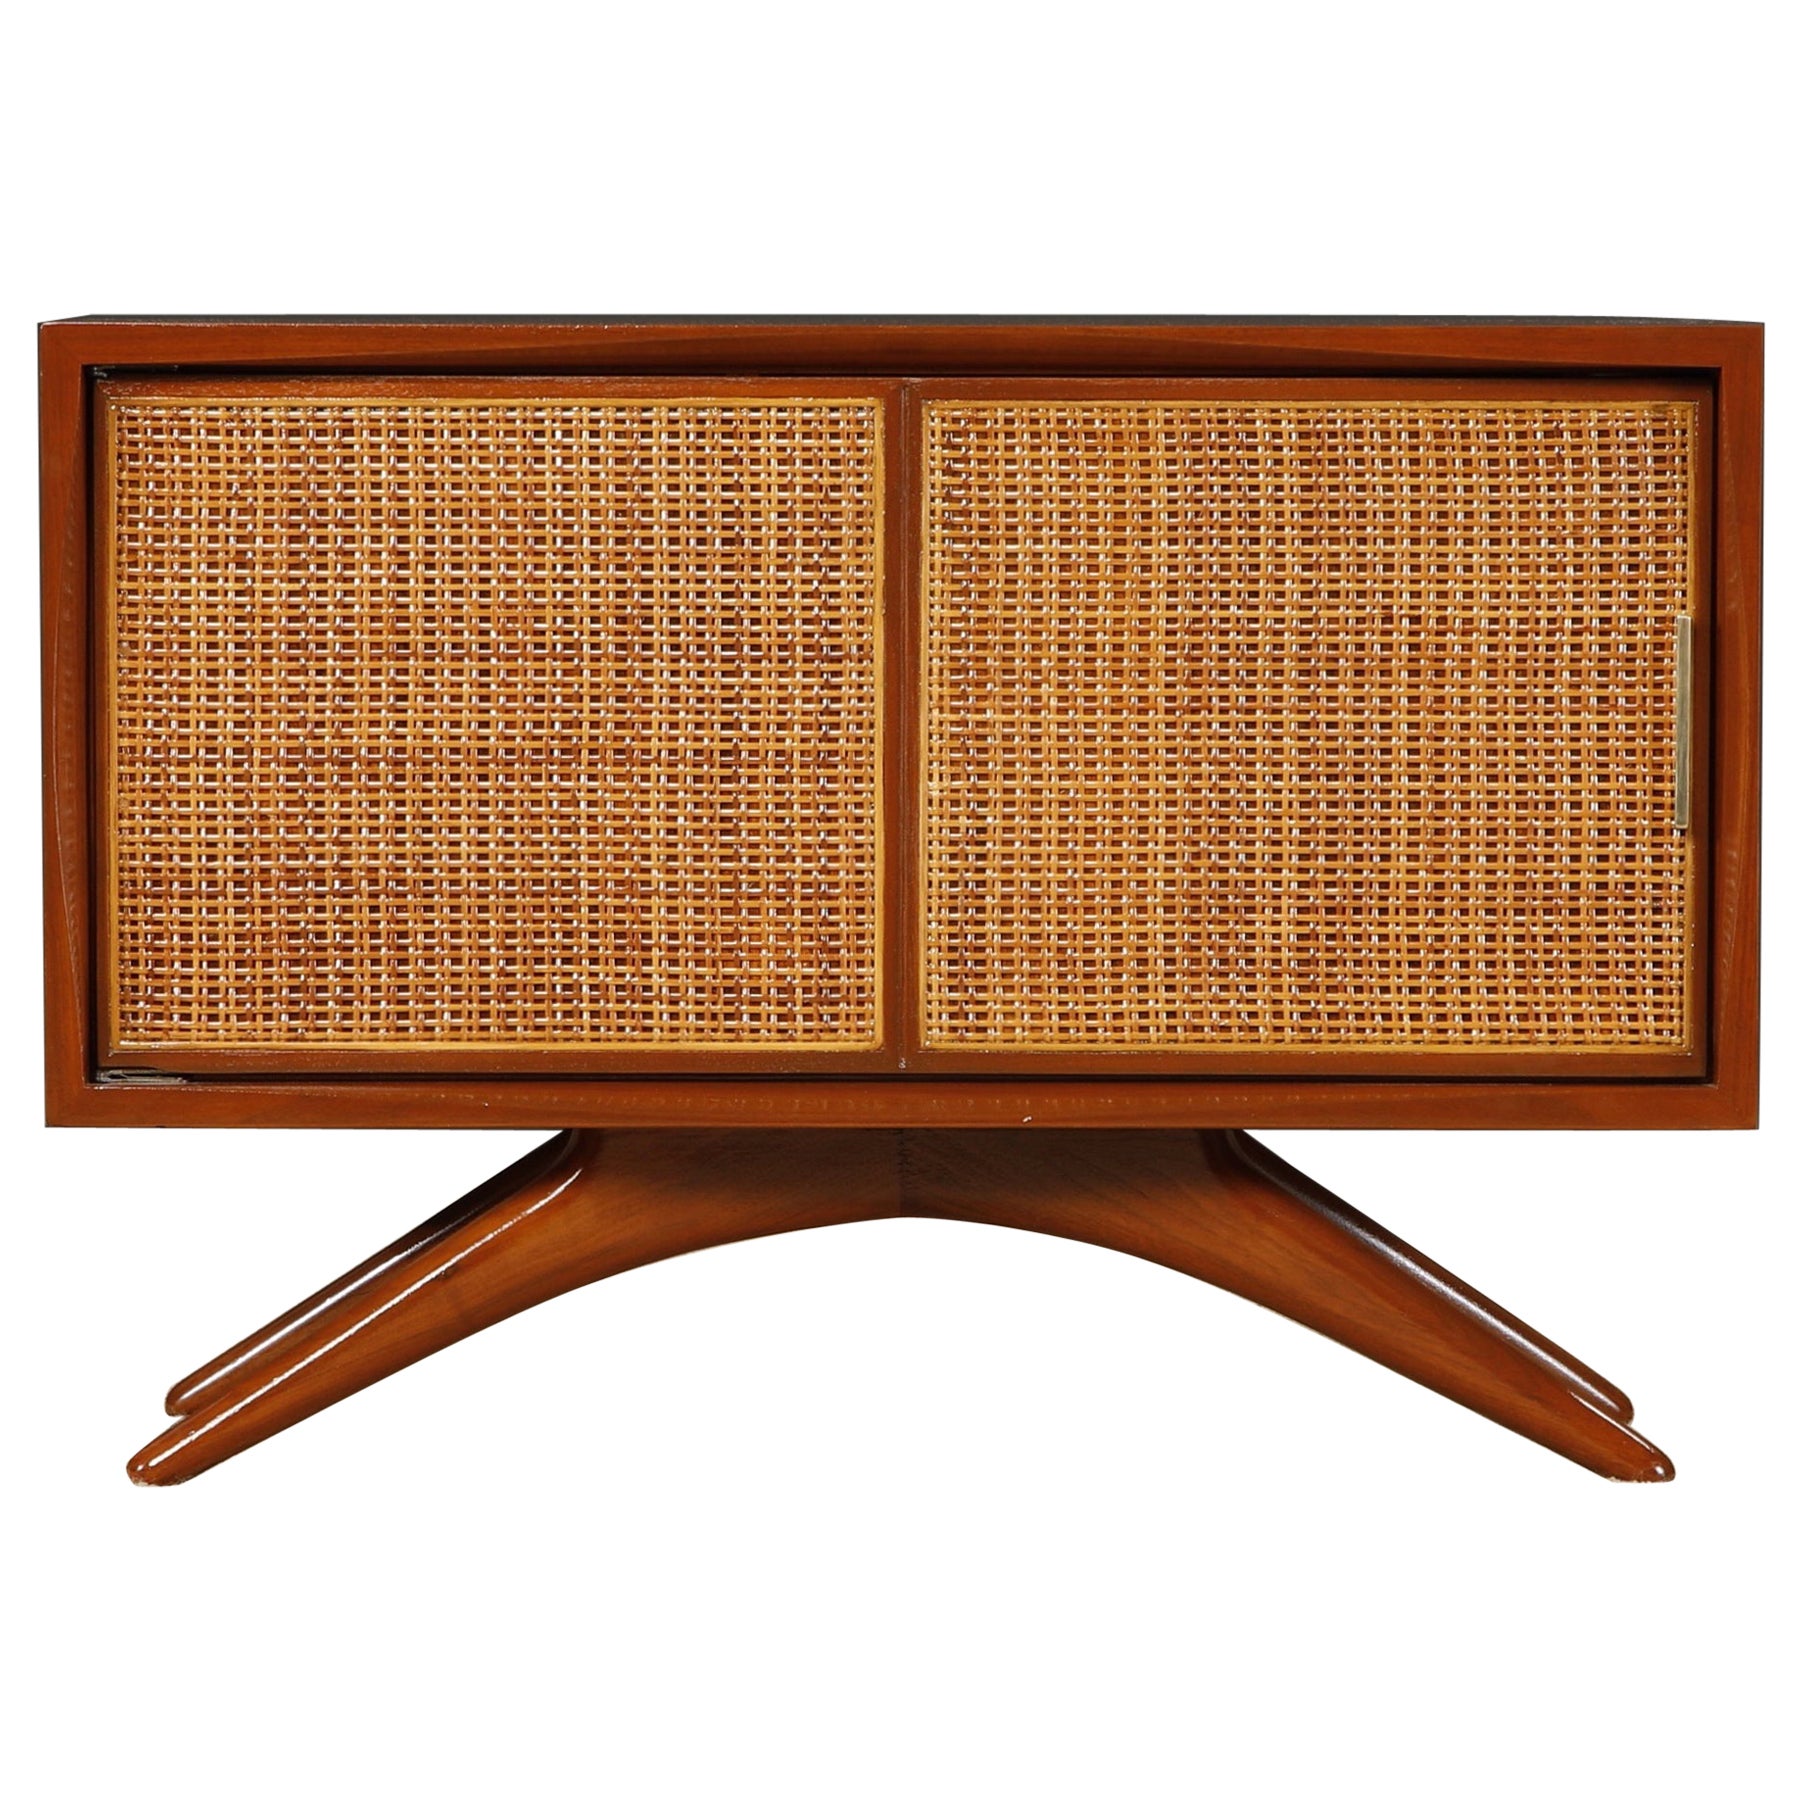 Caned Sculptural Cabinet by Vladimir Kagan for Grosfeld House, 1950s, Signed For Sale